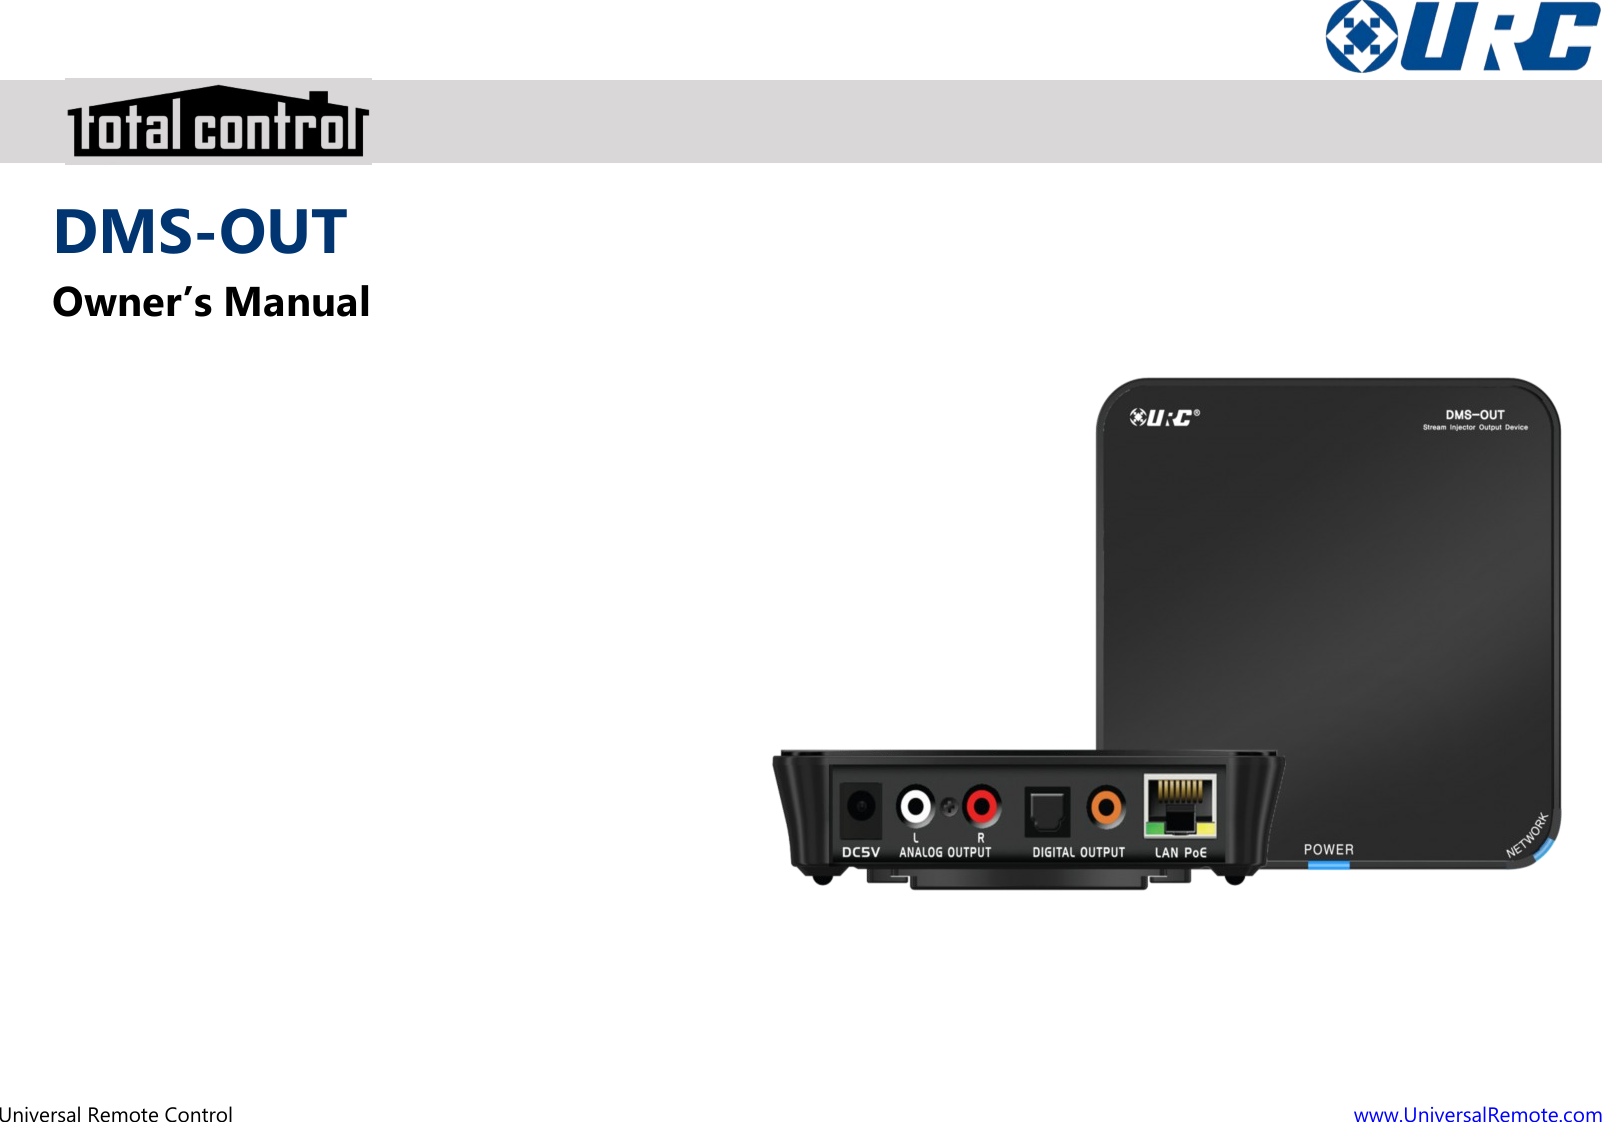 Universal Remote ControlDMS-OUTOwner’s Manualwww.UniversalRemote.com